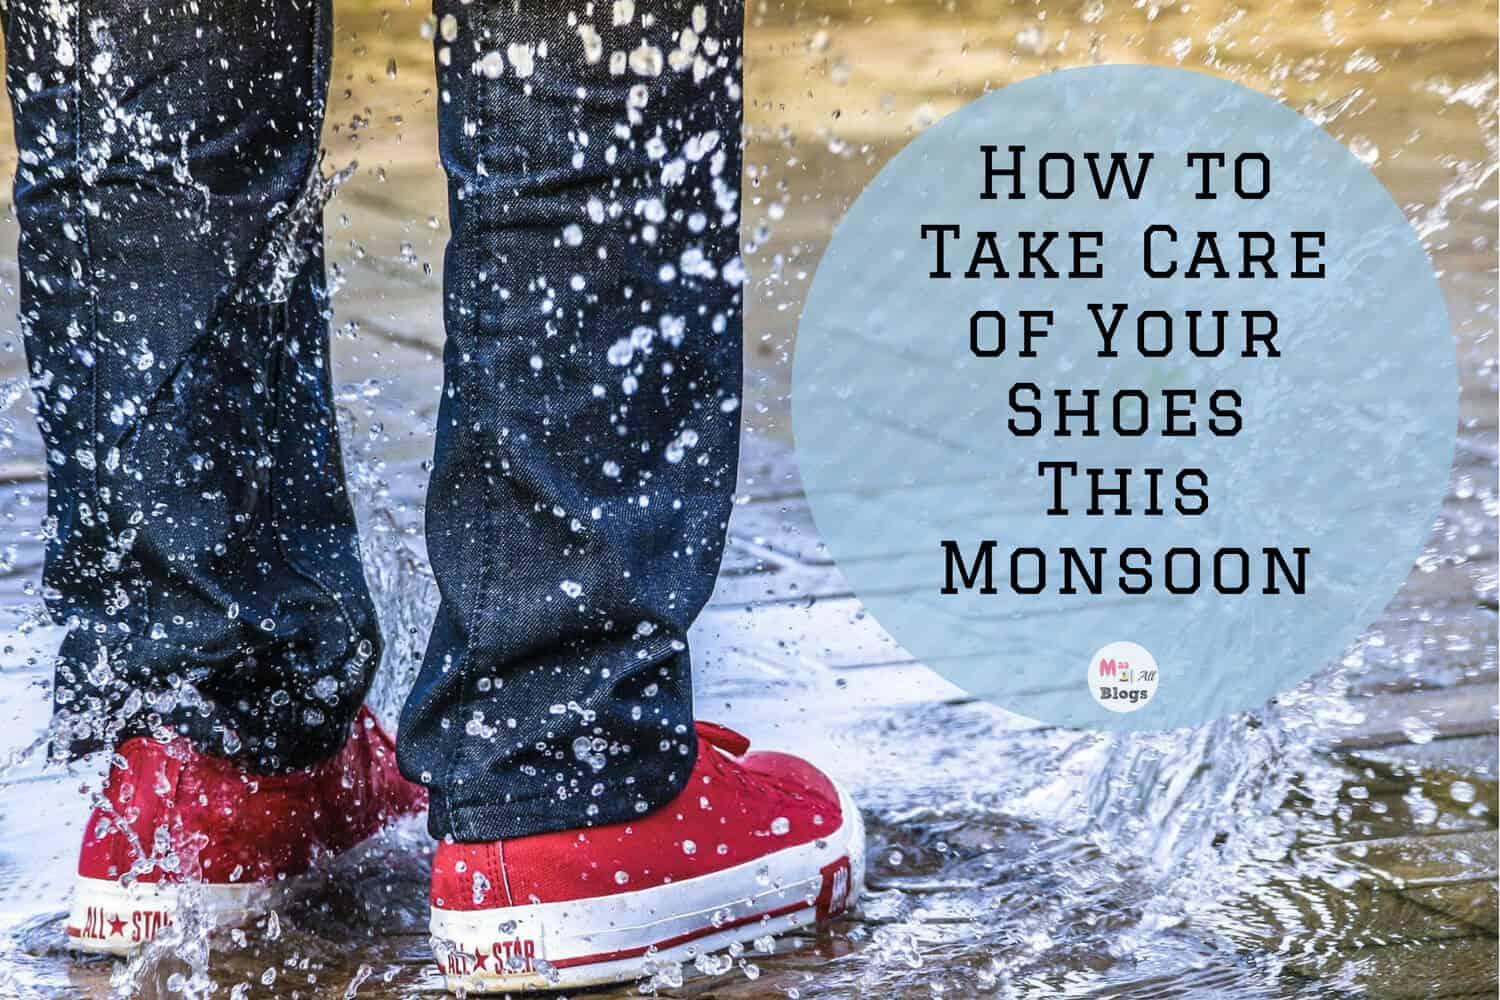 How To Take Care of Your Leather Bags & Shoes During Monsoons